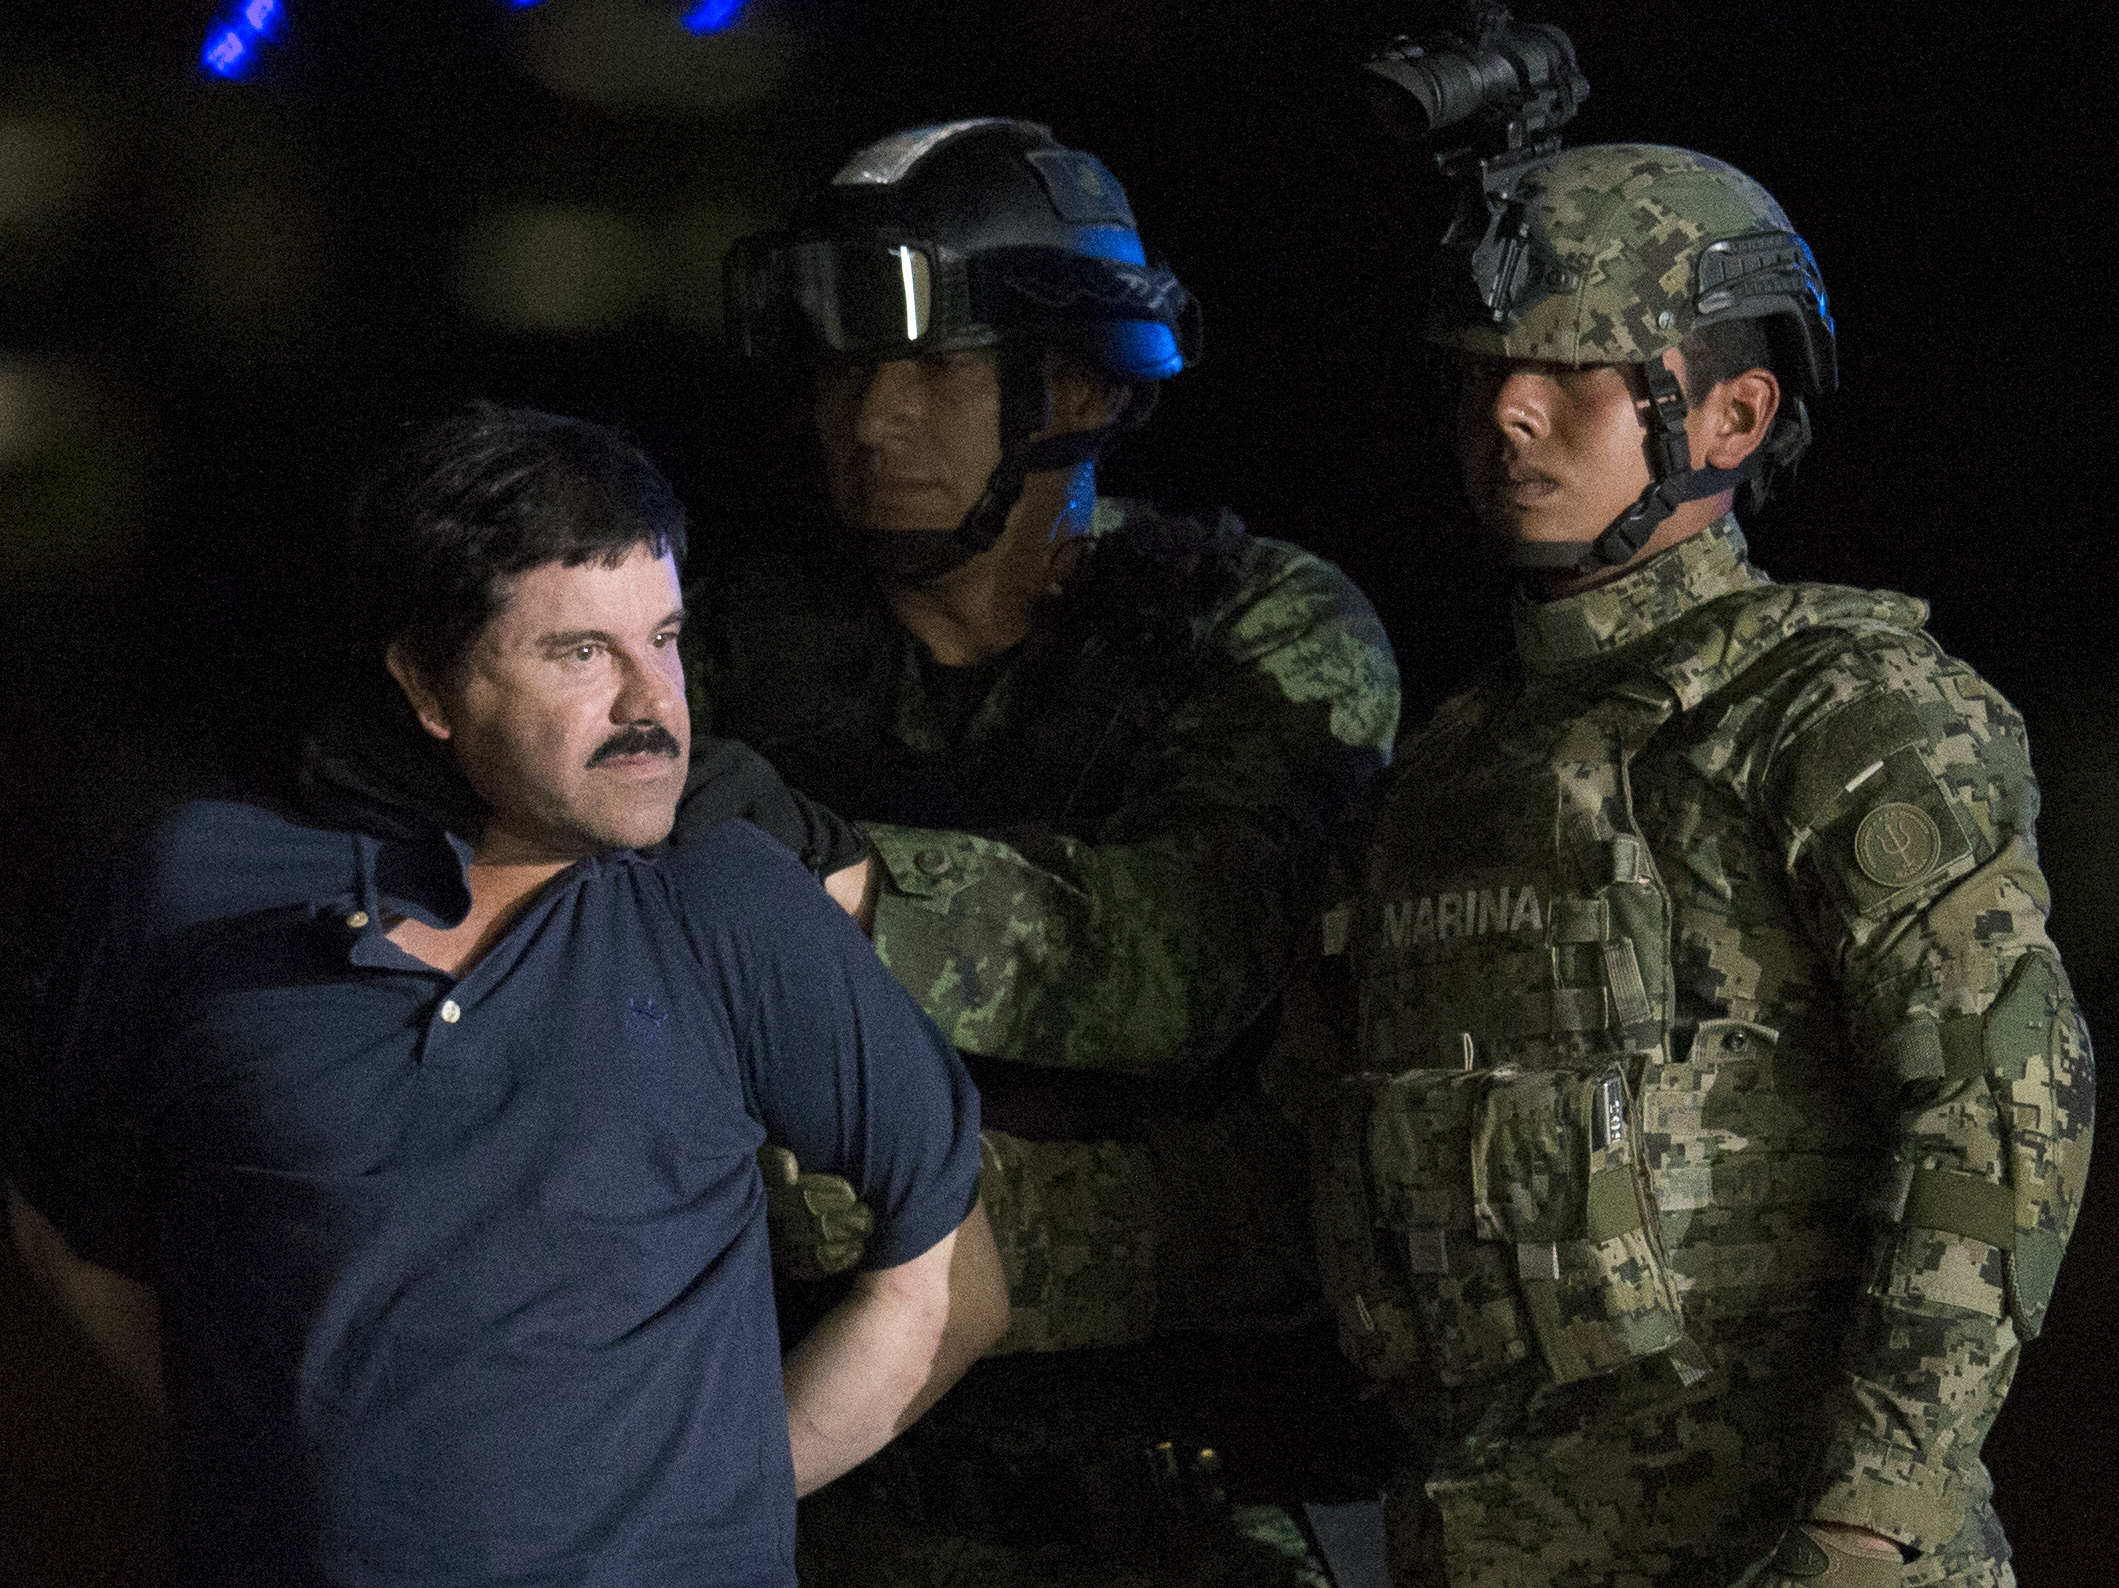 Joaquin Guzman El Chapo is taken to a federal hangar in Mexico by Mexican army soldiers in 2016.